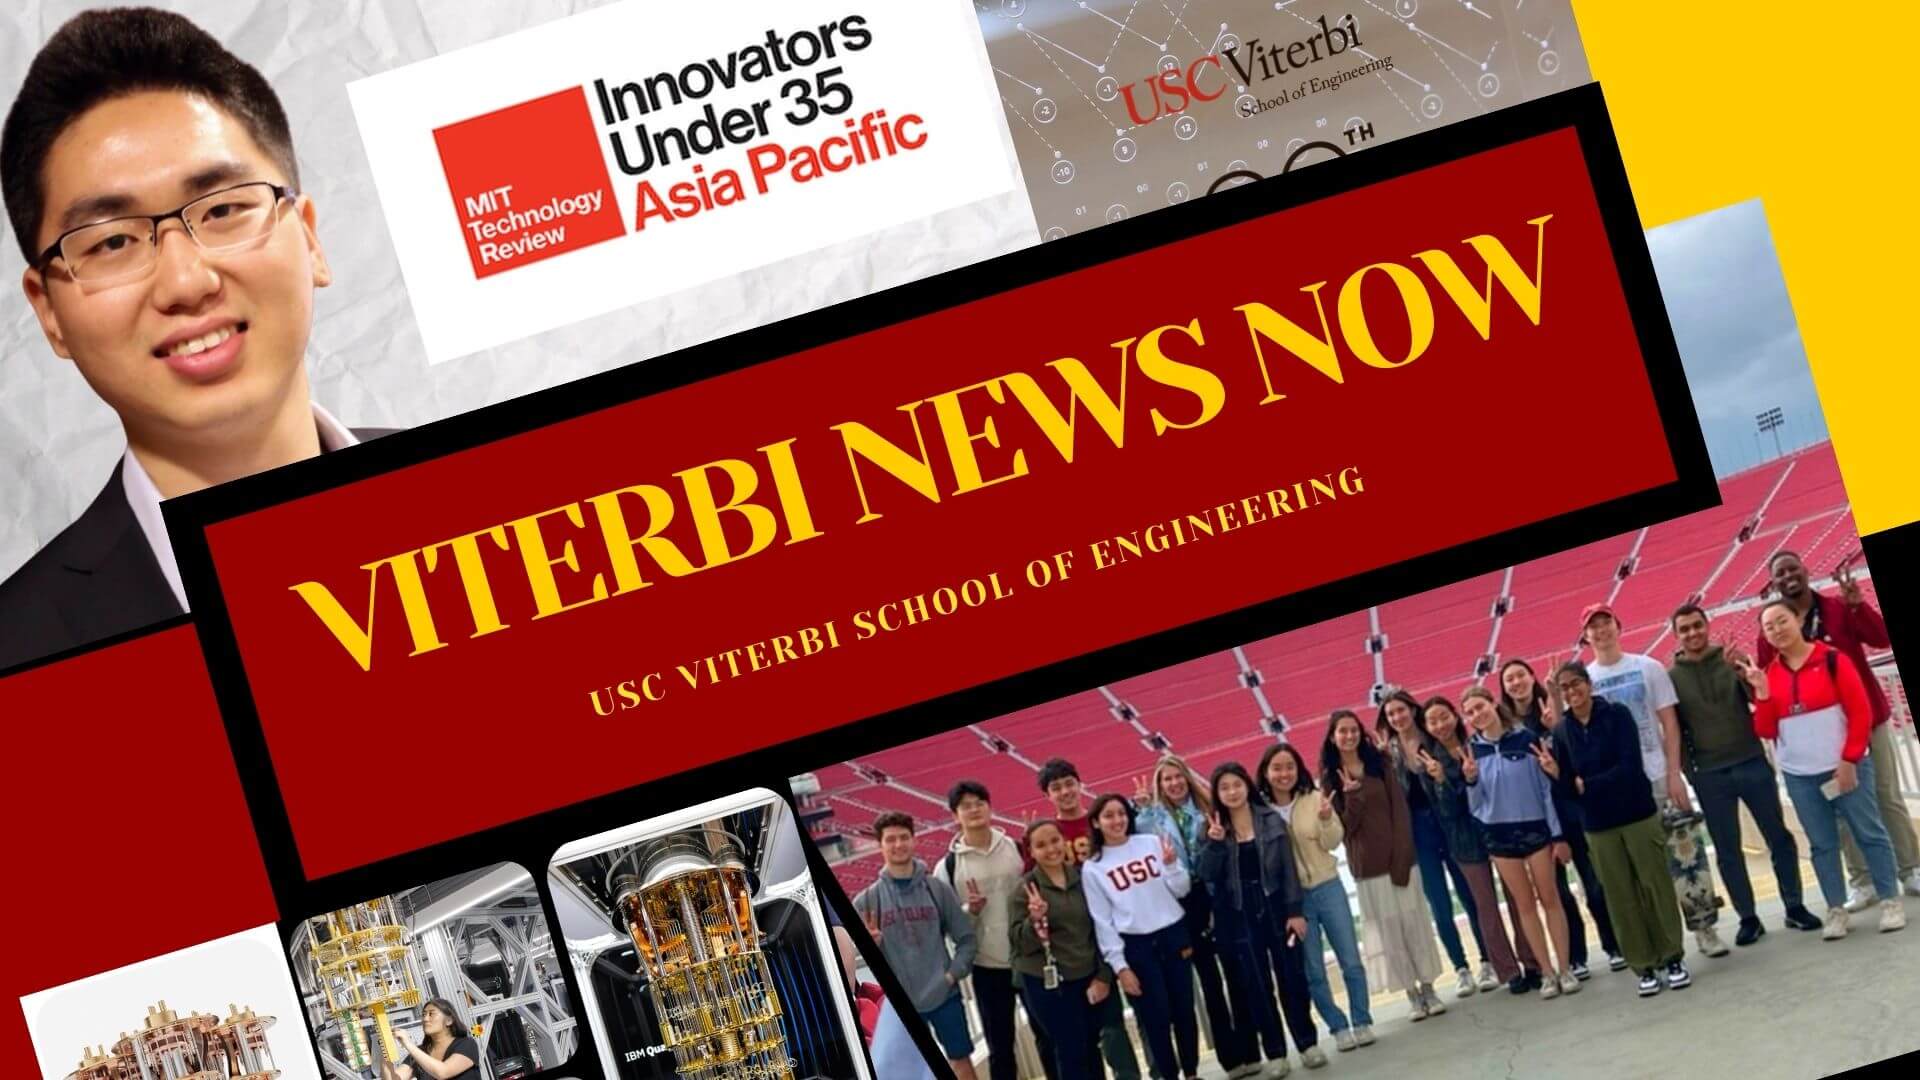 Featured image for “Viterbi News Now – Episode 66”